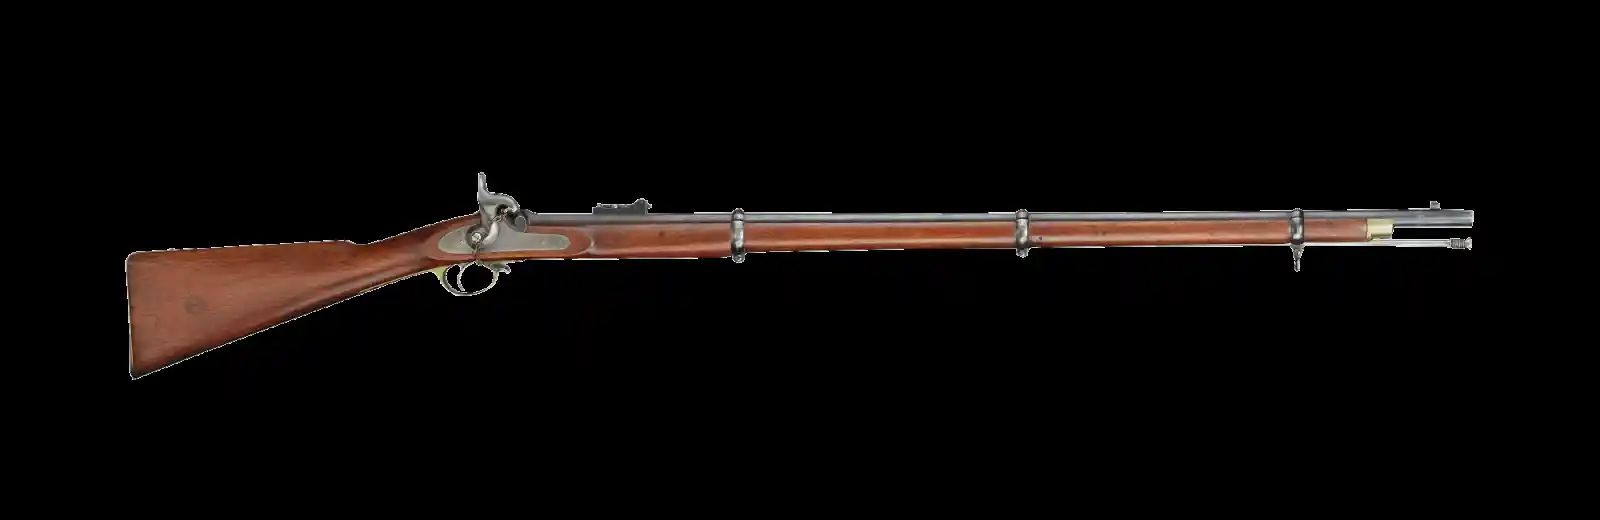 The Enfield Rifle: A Catalyst for Rebellion